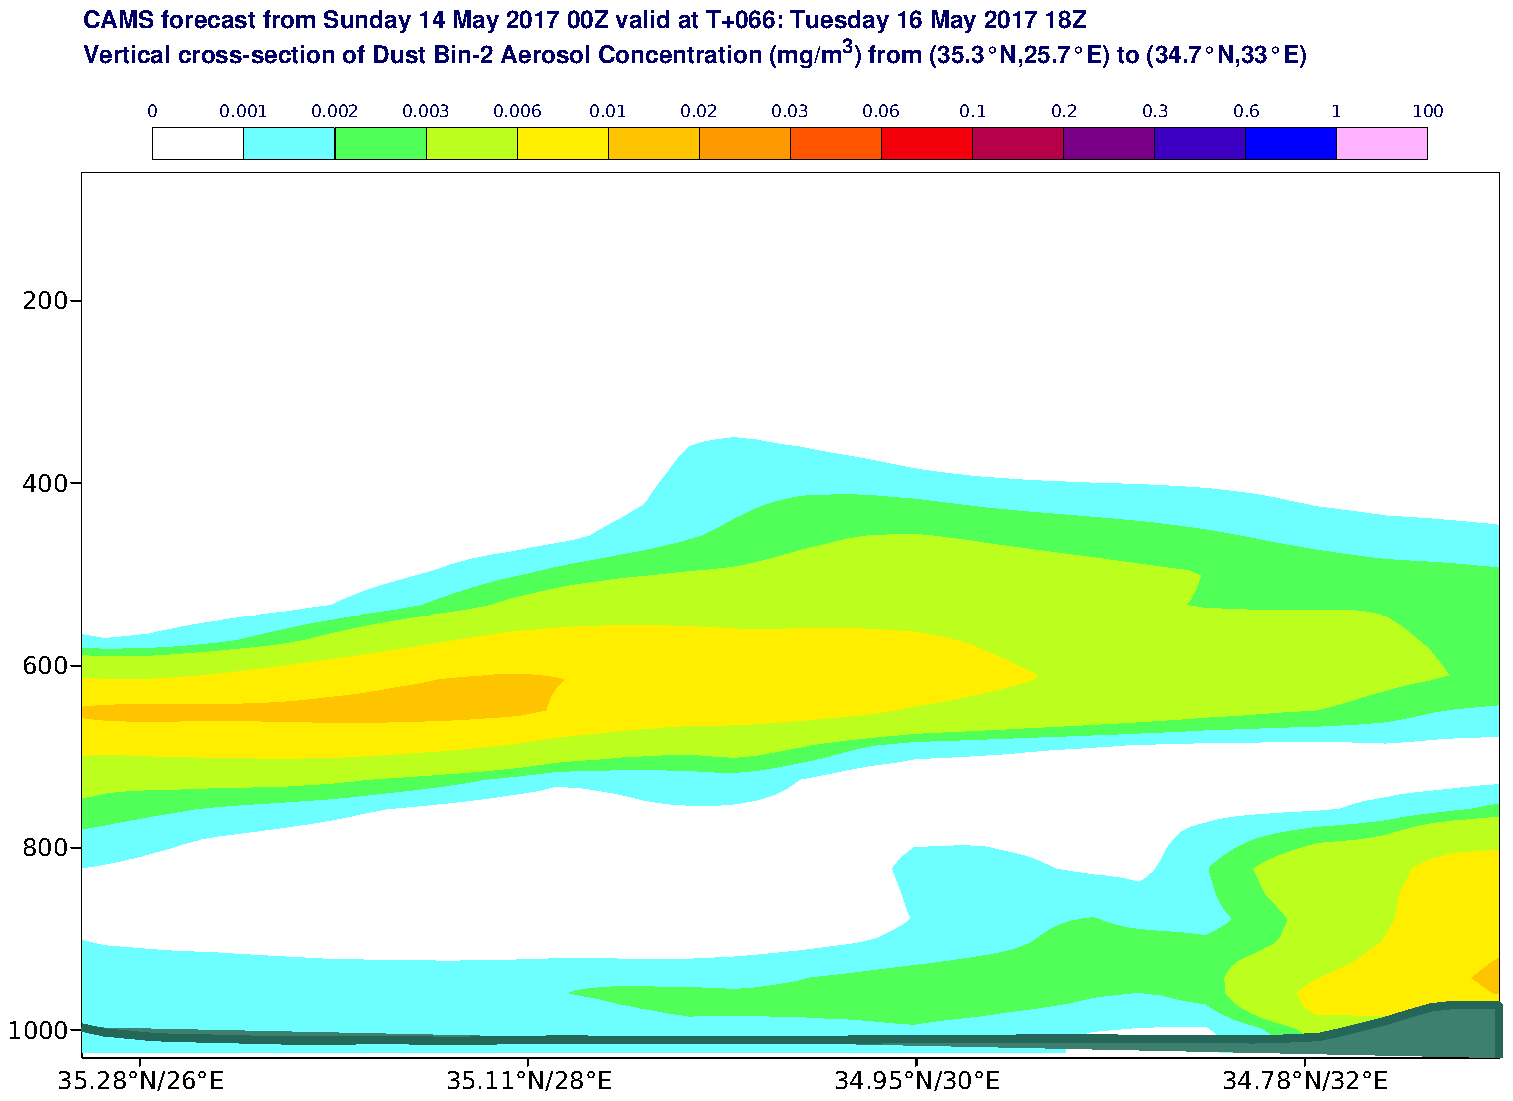 Vertical cross-section of Dust Bin-2 Aerosol Concentration (mg/m3) valid at T66 - 2017-05-16 18:00